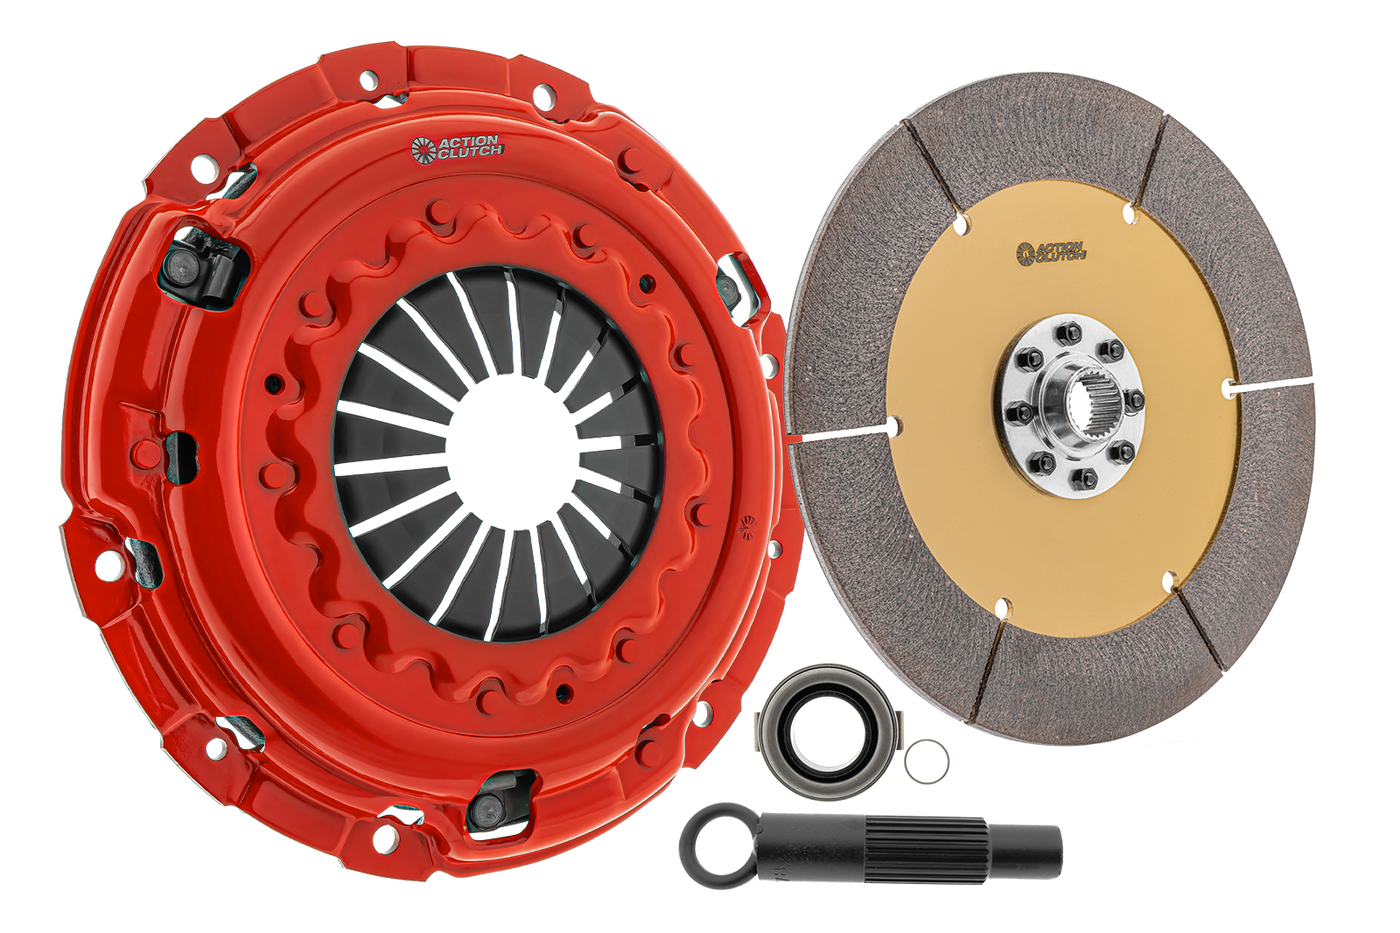 Ironman Unsprung Clutch Kit for Infiniti G35 2007-2008 3.5L (VQ35HR) Without Heavy Duty Concentric Slave Cylinder